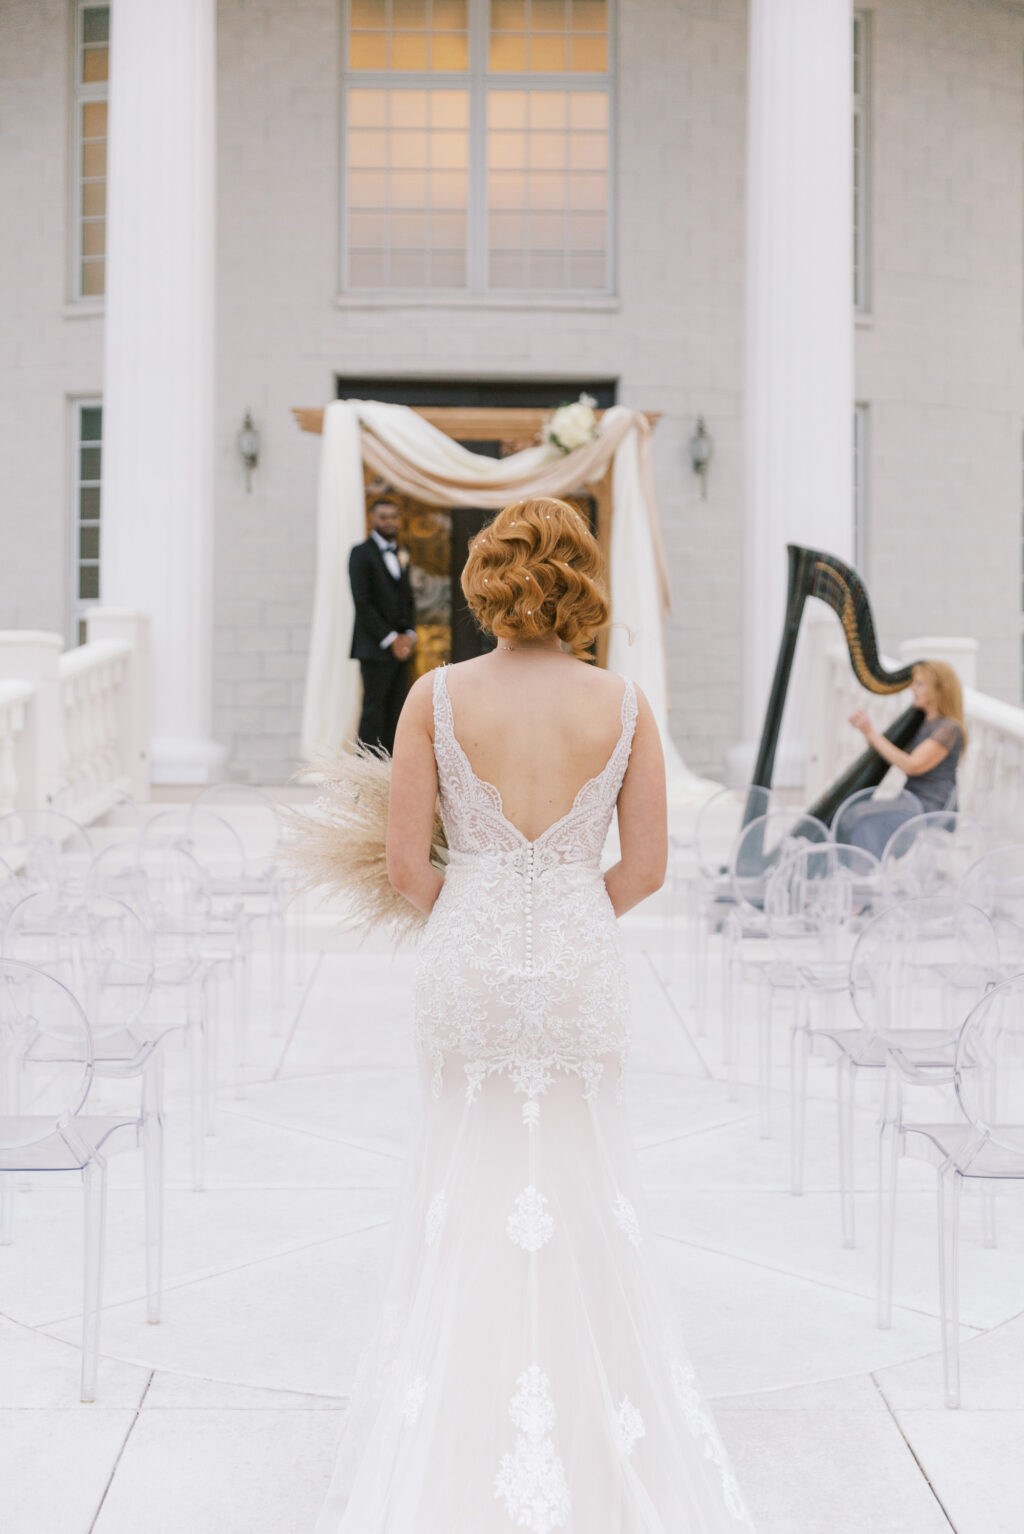 Vintage Old Hollywood Gatsby Inspired Wedding Ceremony with Harpist | Florida Venue The Whitehurst Gallery | Tampa Bay Hair and Makeup Femme Akoi Beauty Studio